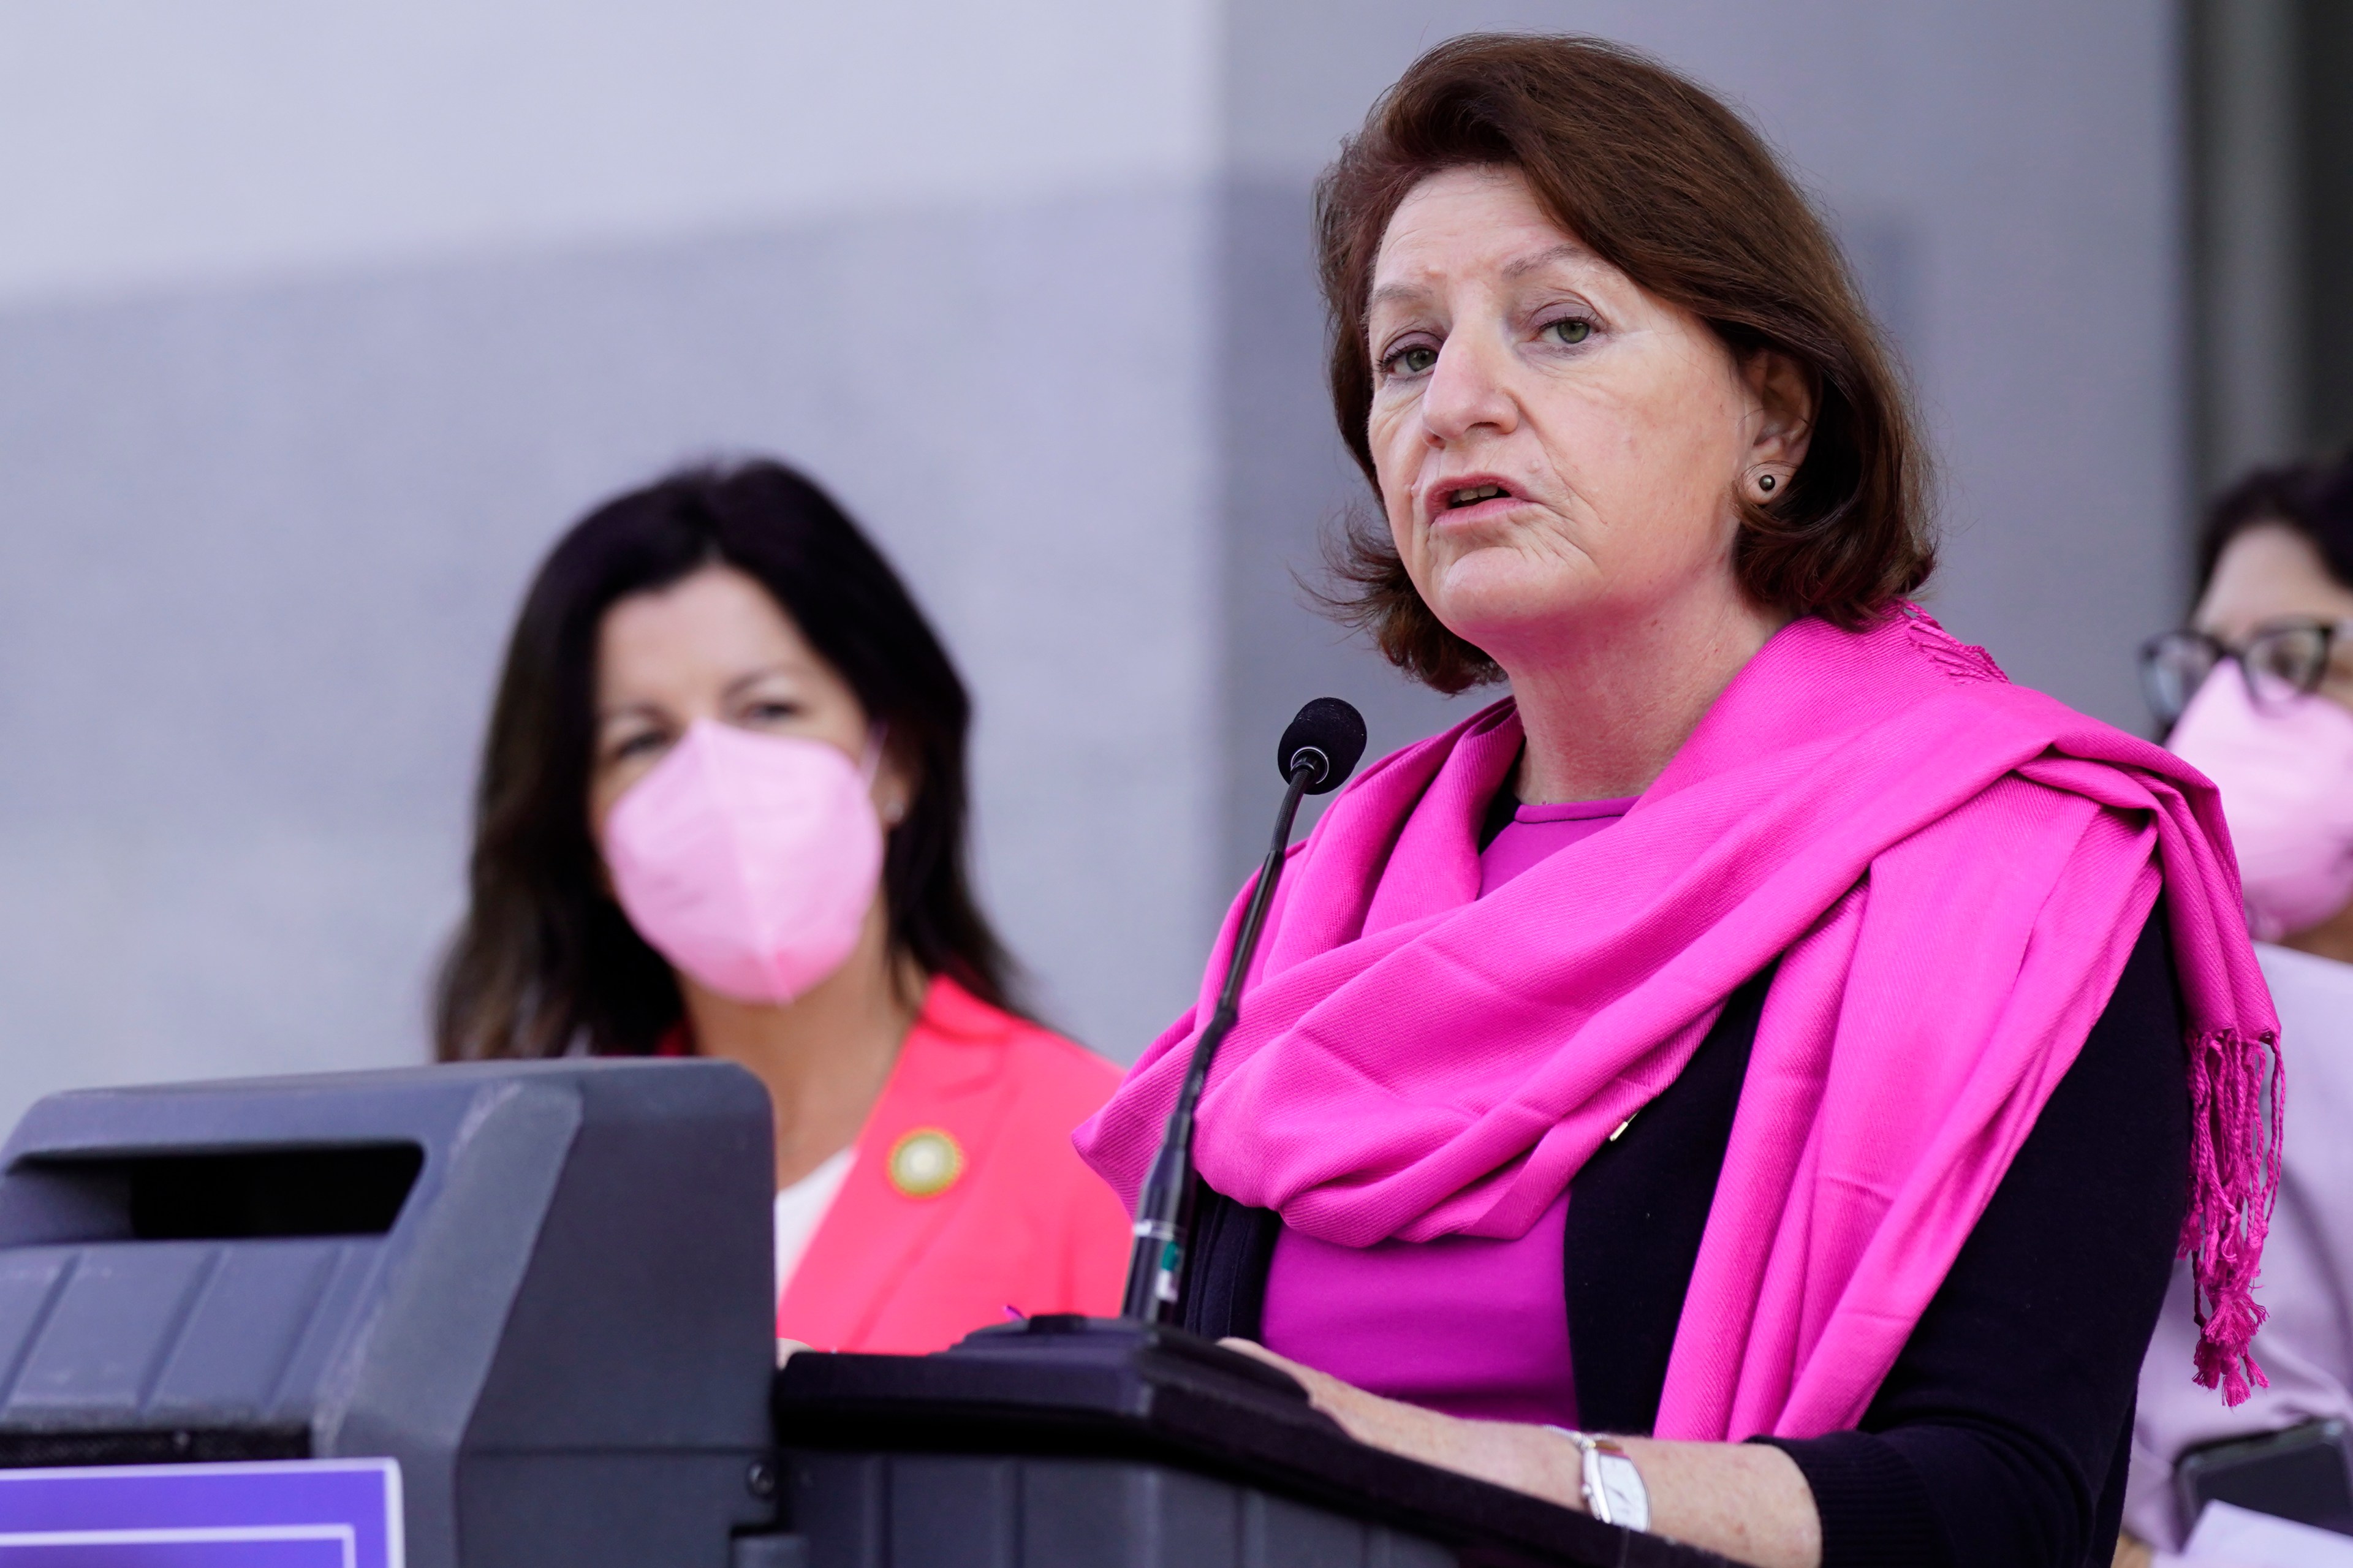 Woman in pink scarf speaks into microphone